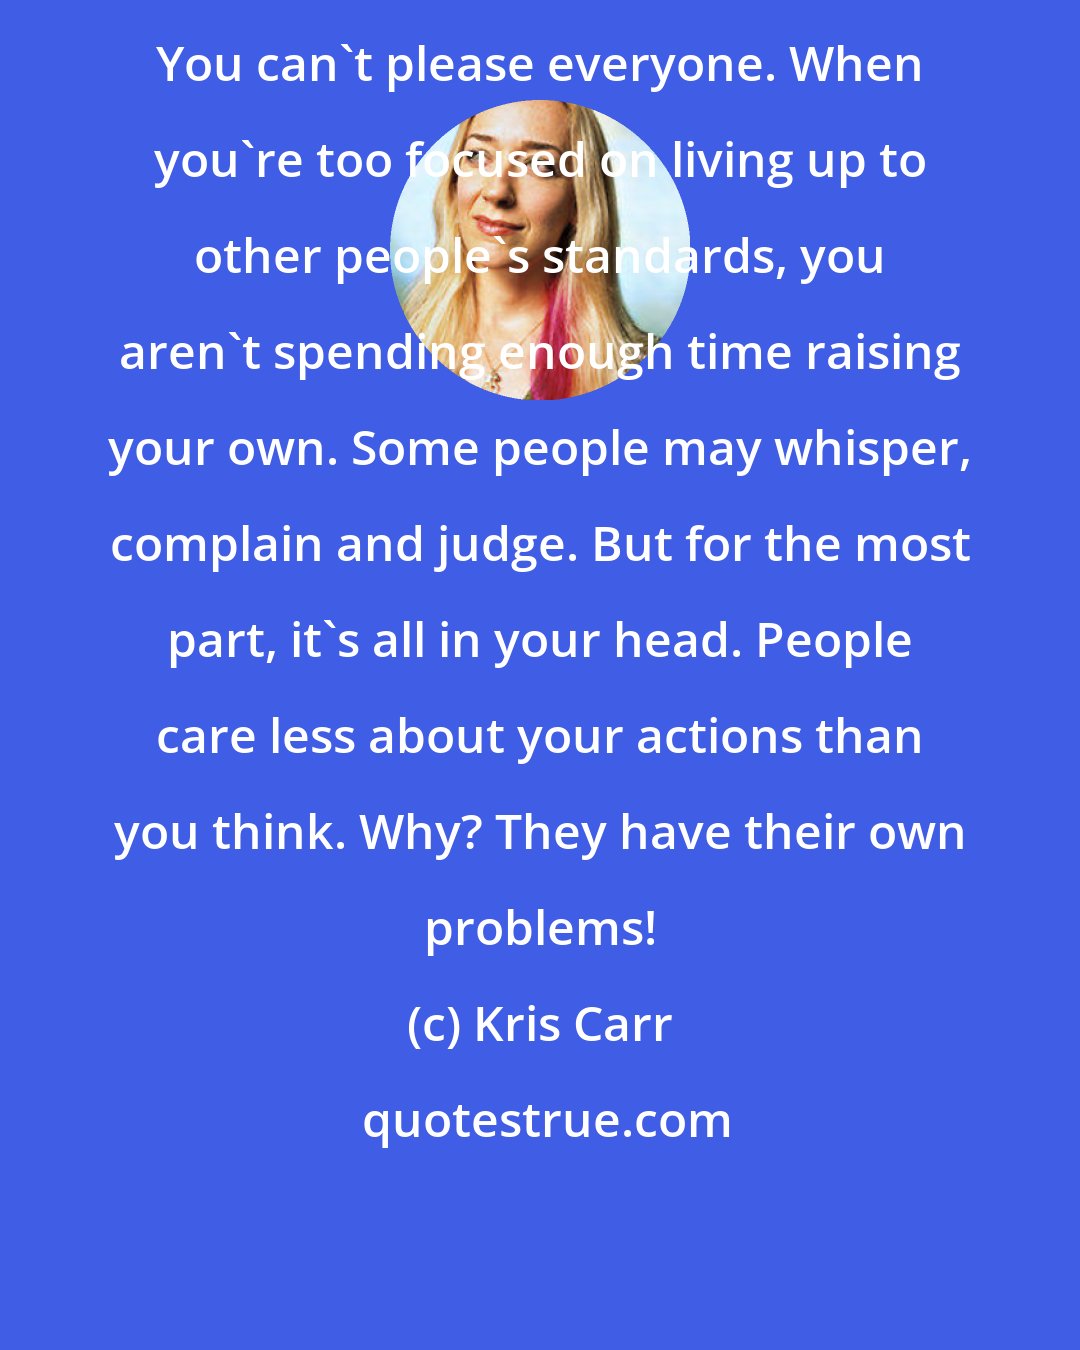 Kris Carr: You can't please everyone. When you're too focused on living up to other people's standards, you aren't spending enough time raising your own. Some people may whisper, complain and judge. But for the most part, it's all in your head. People care less about your actions than you think. Why? They have their own problems!